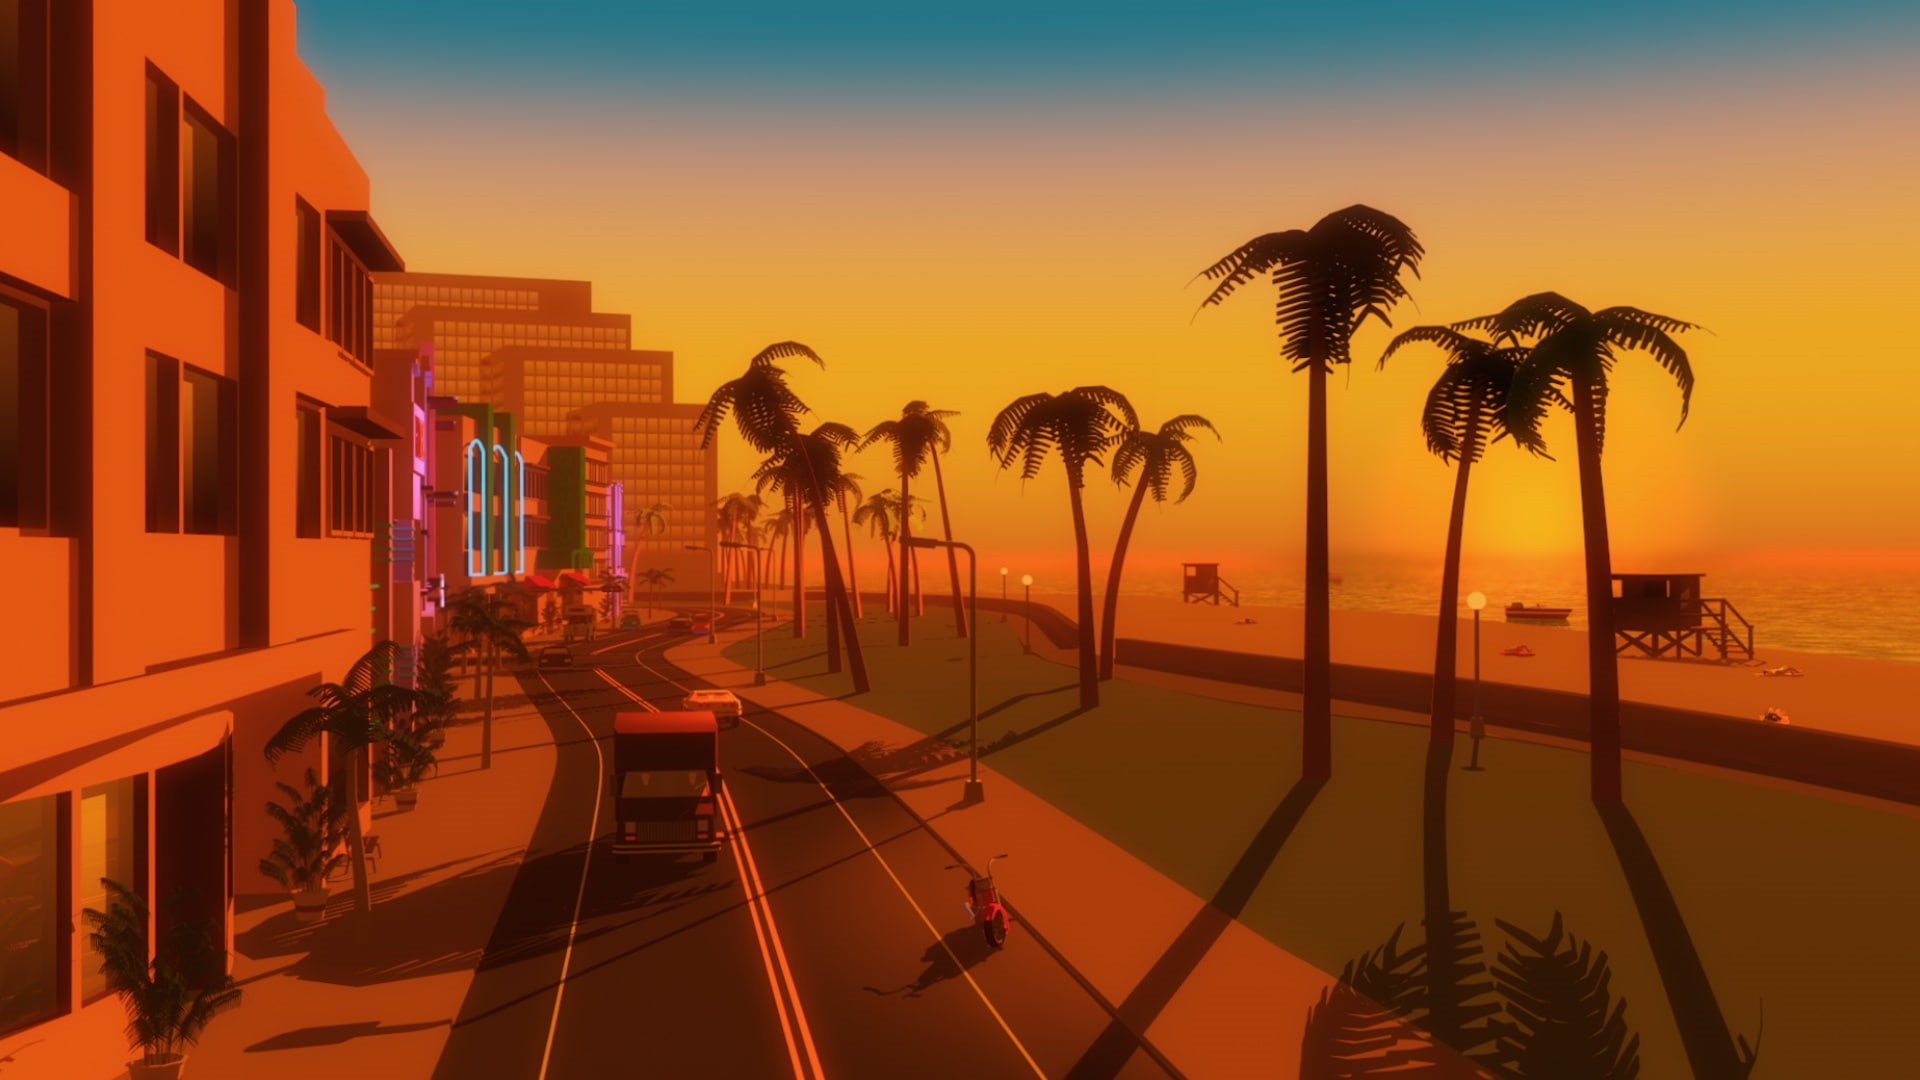 Wallpaper / Machine, 1080P, Neon, Synthpop, The city, Street, Electronic, Sunset, Retrowave, Sea, Washington Beach, Graphics, Synthwave, Synth pop, Miami, Vice City free download